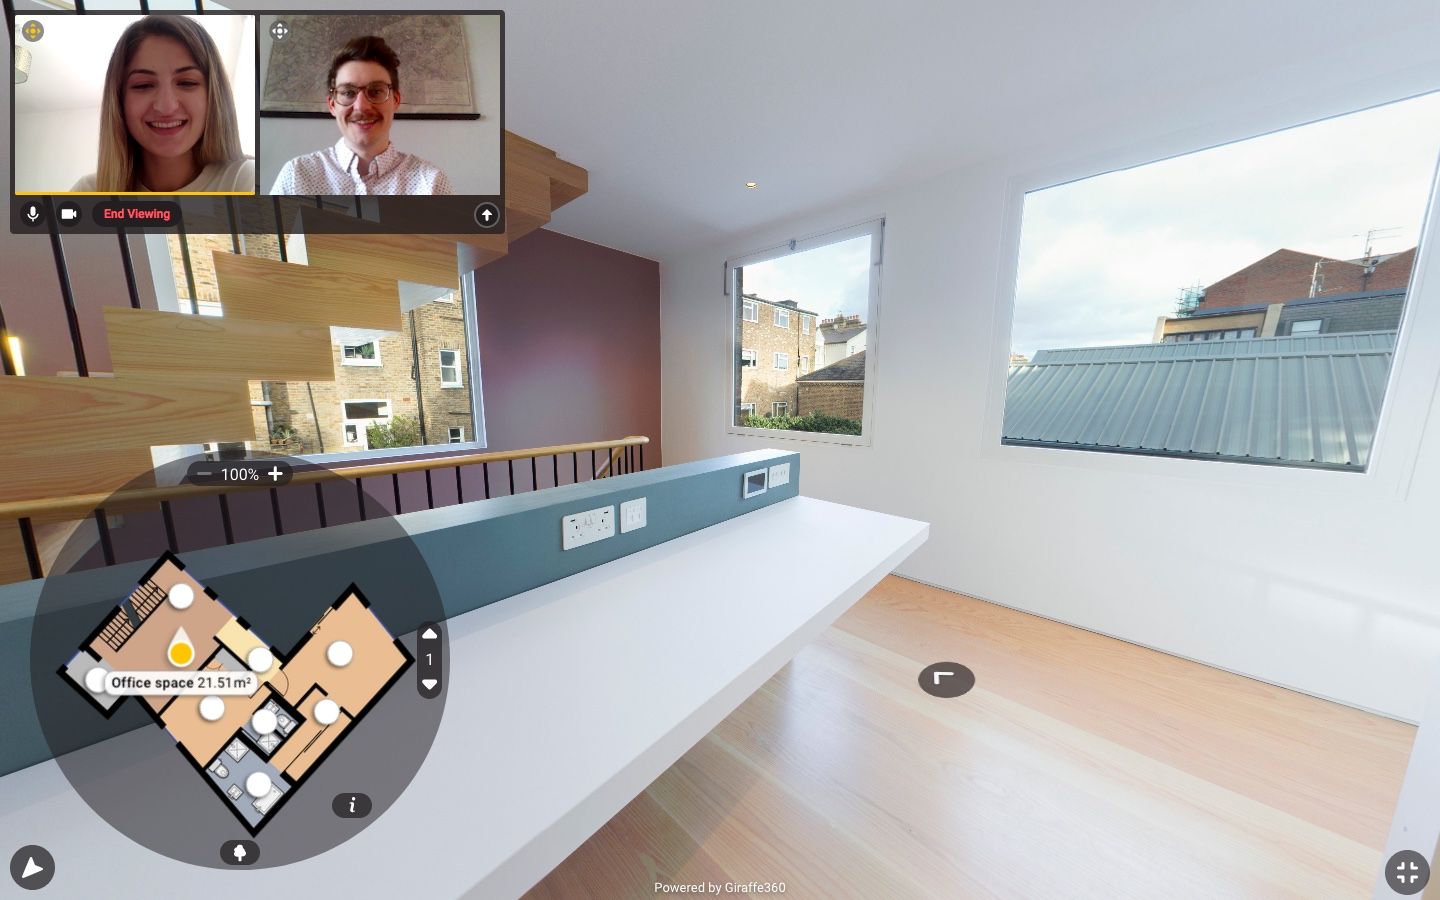 two people viewing a home remotely through a video call